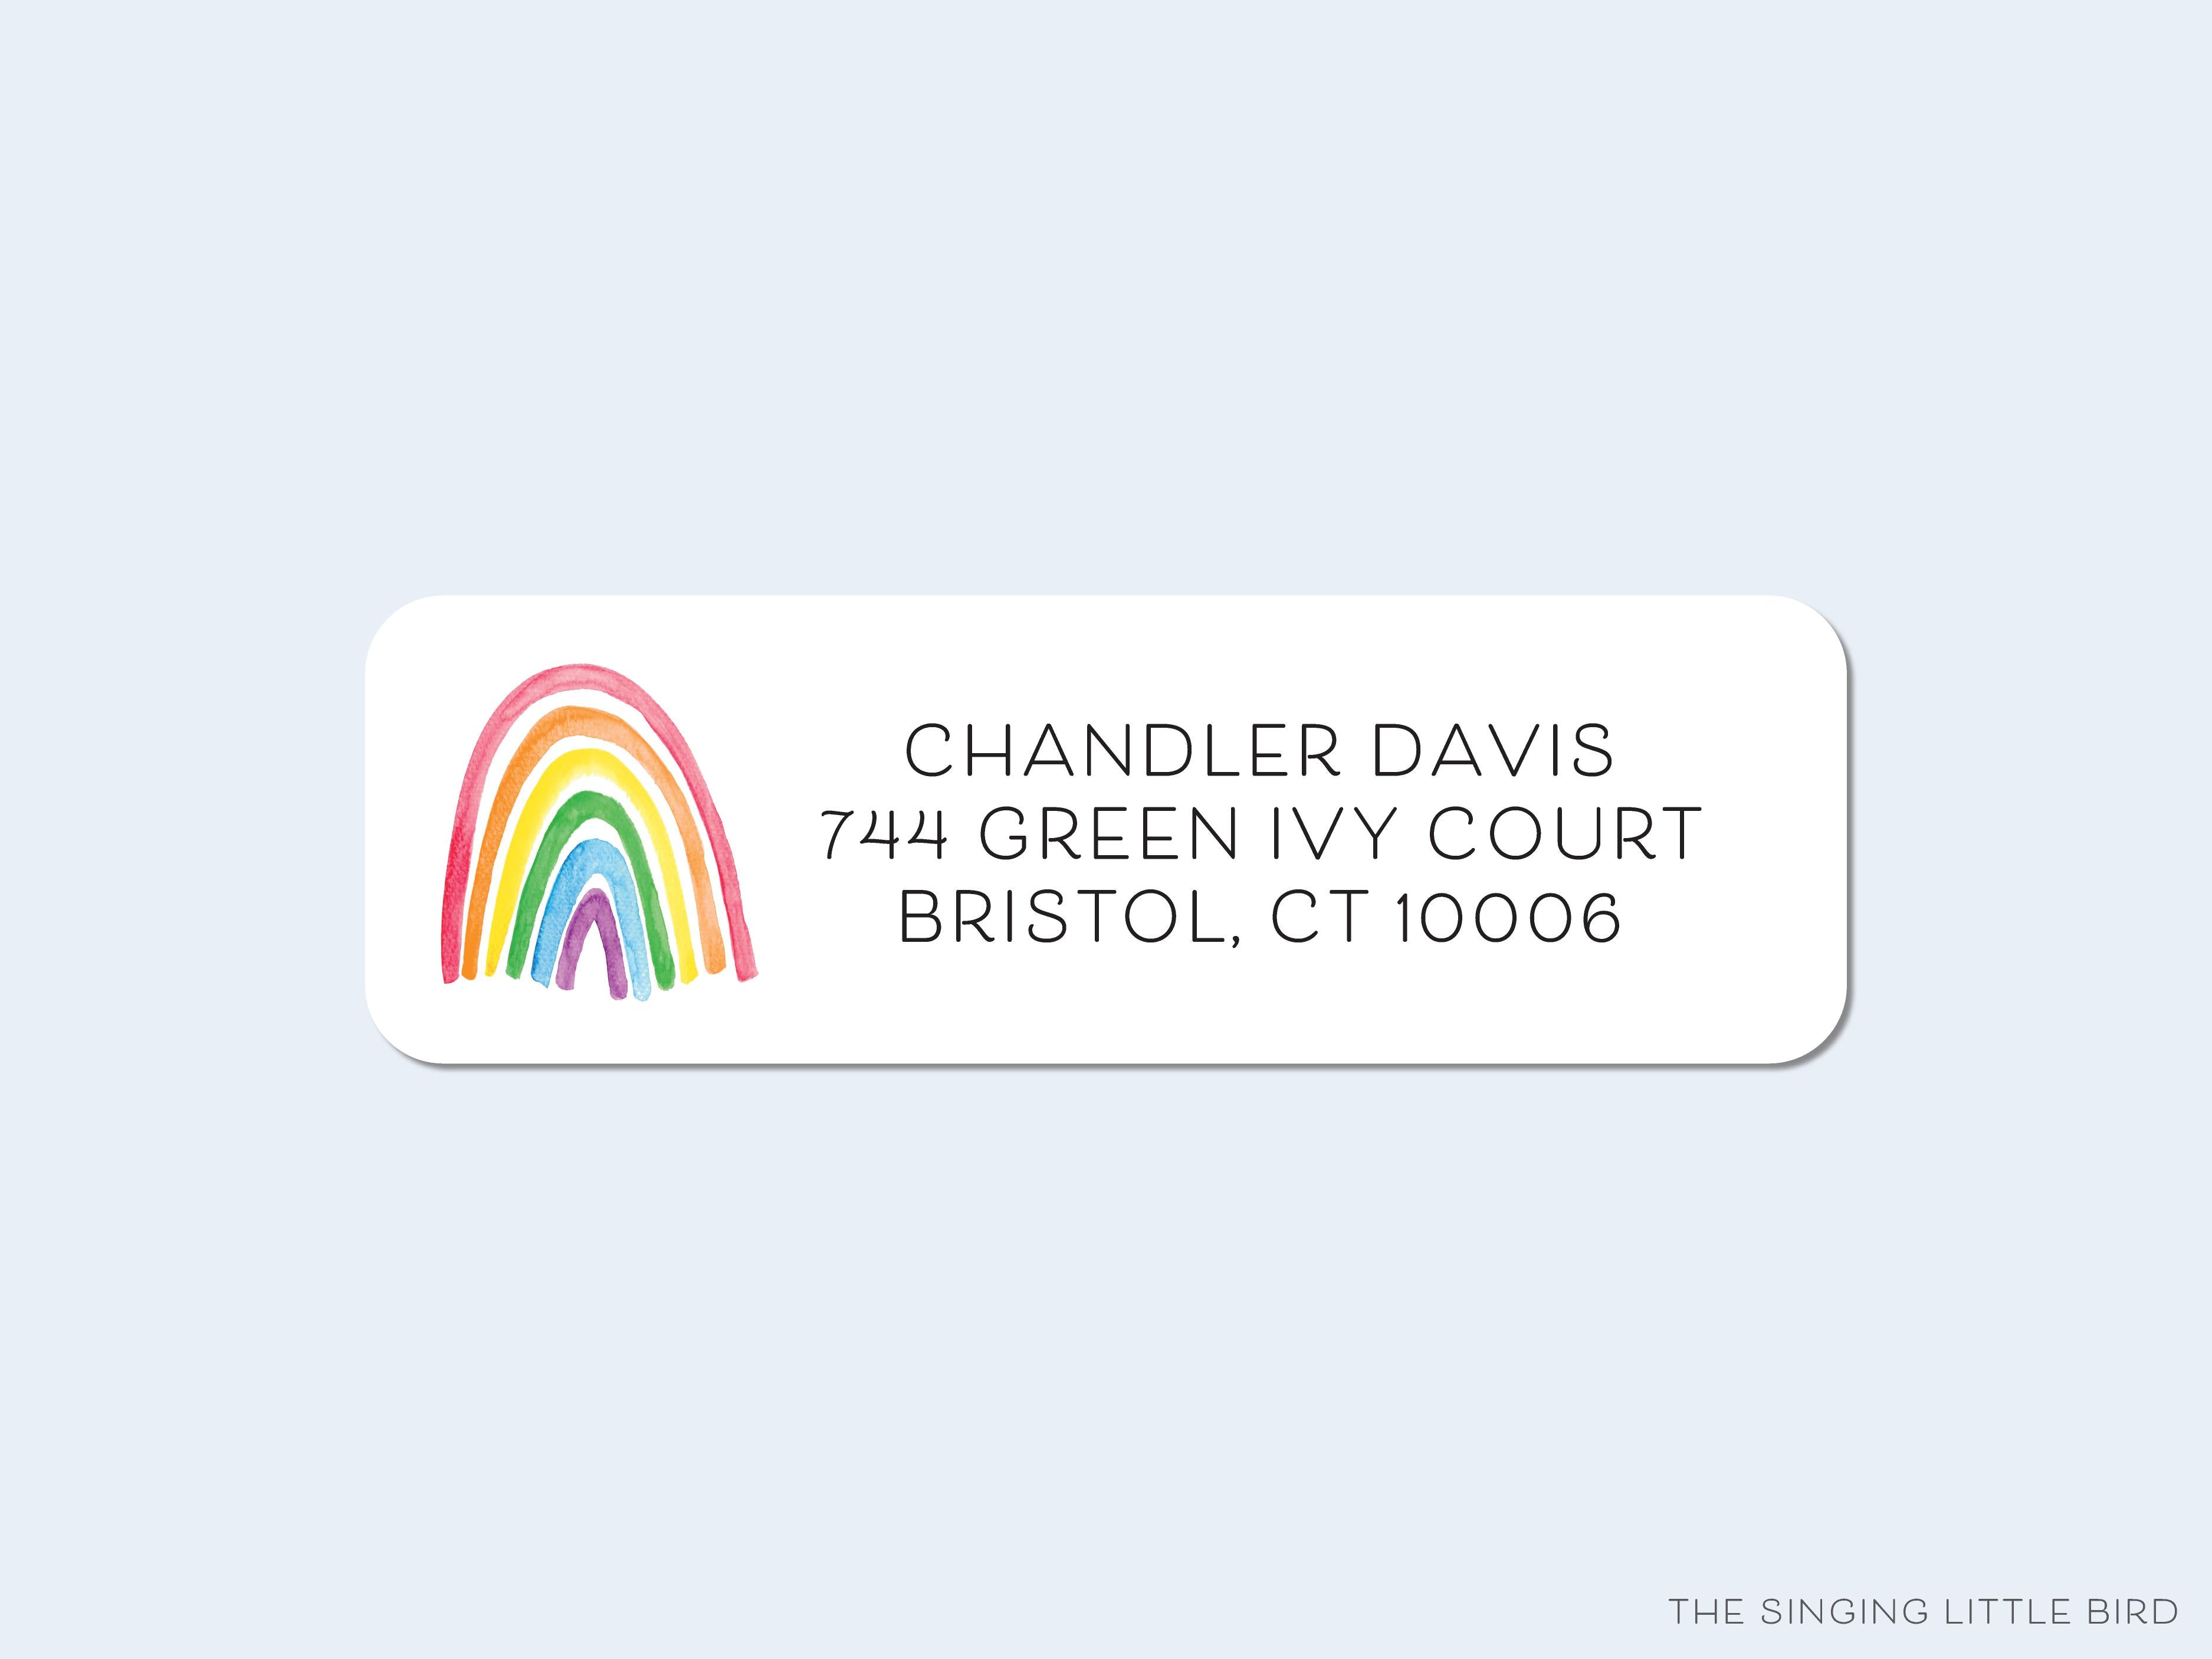 Bright Rainbow Return Address Labels-These personalized return address labels are 2.625" x 1" and feature our hand-painted watercolor rainbow, printed in the USA on beautiful matte finish labels. These make great gifts for yourself or the rainbow lover.-The Singing Little Bird